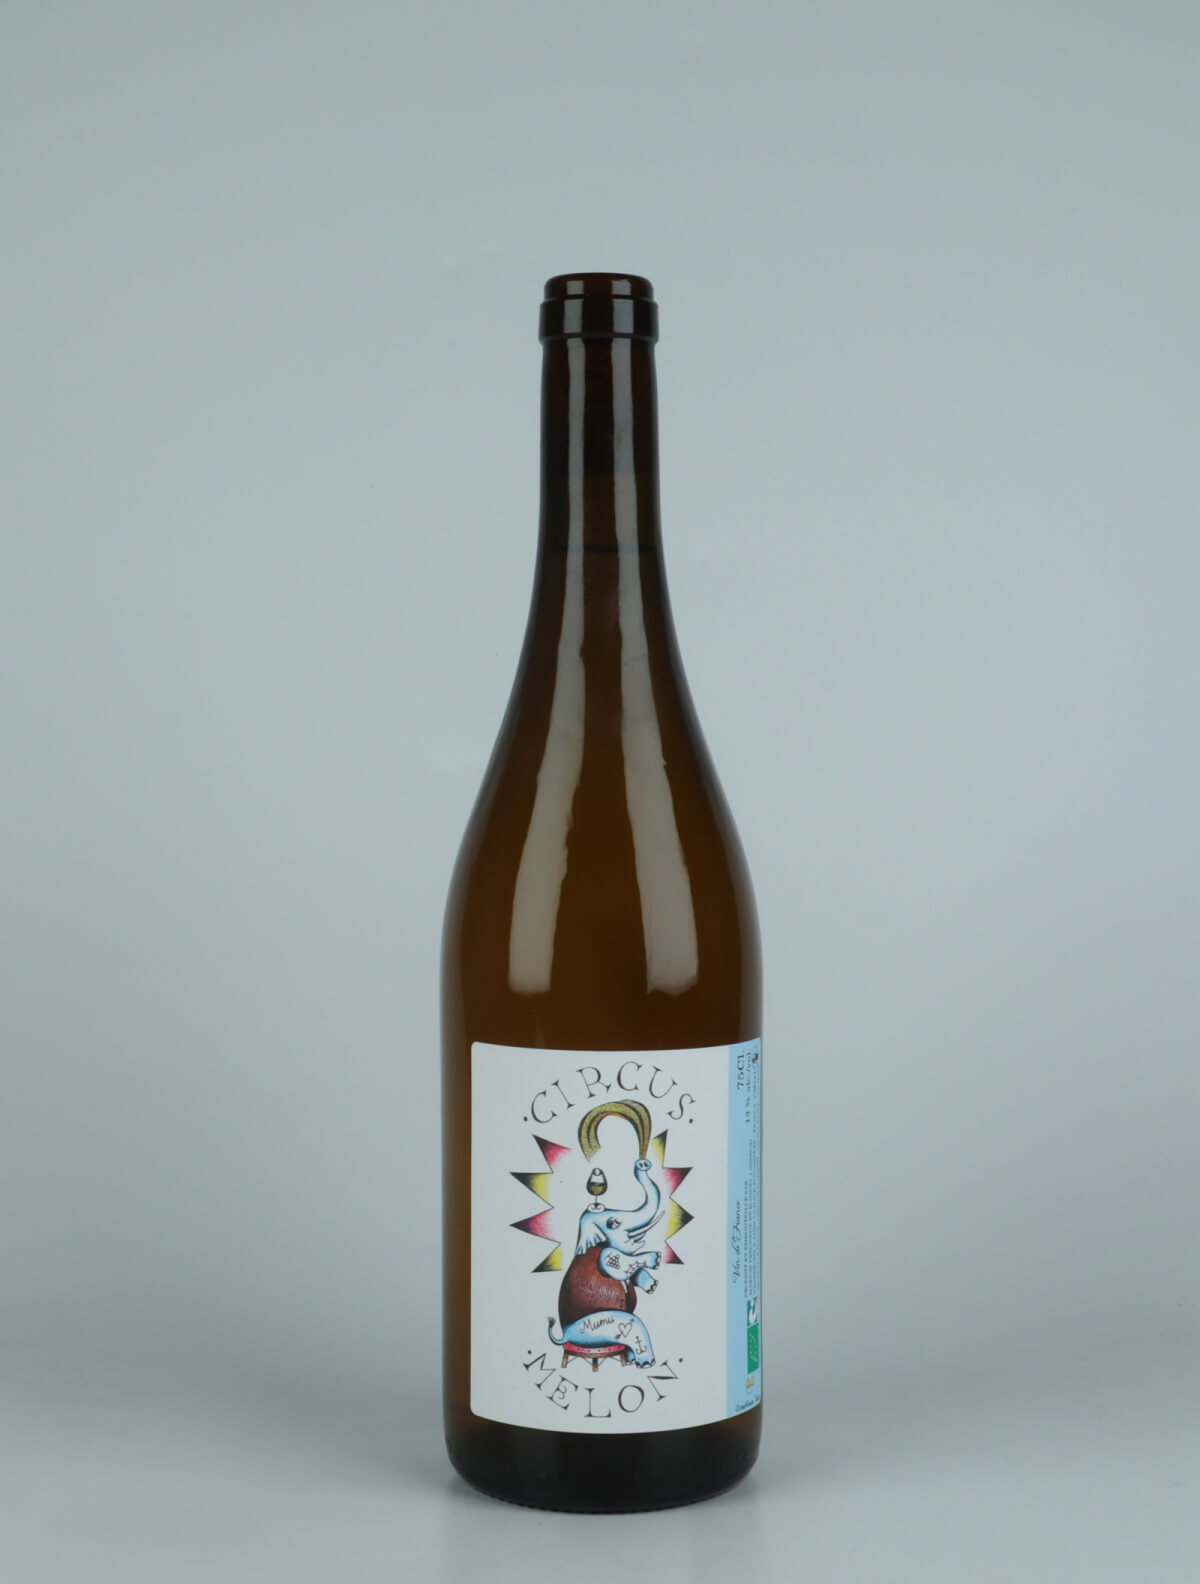 A bottle 2022 Circus Melon White wine from Complémen'terre, Loire in France